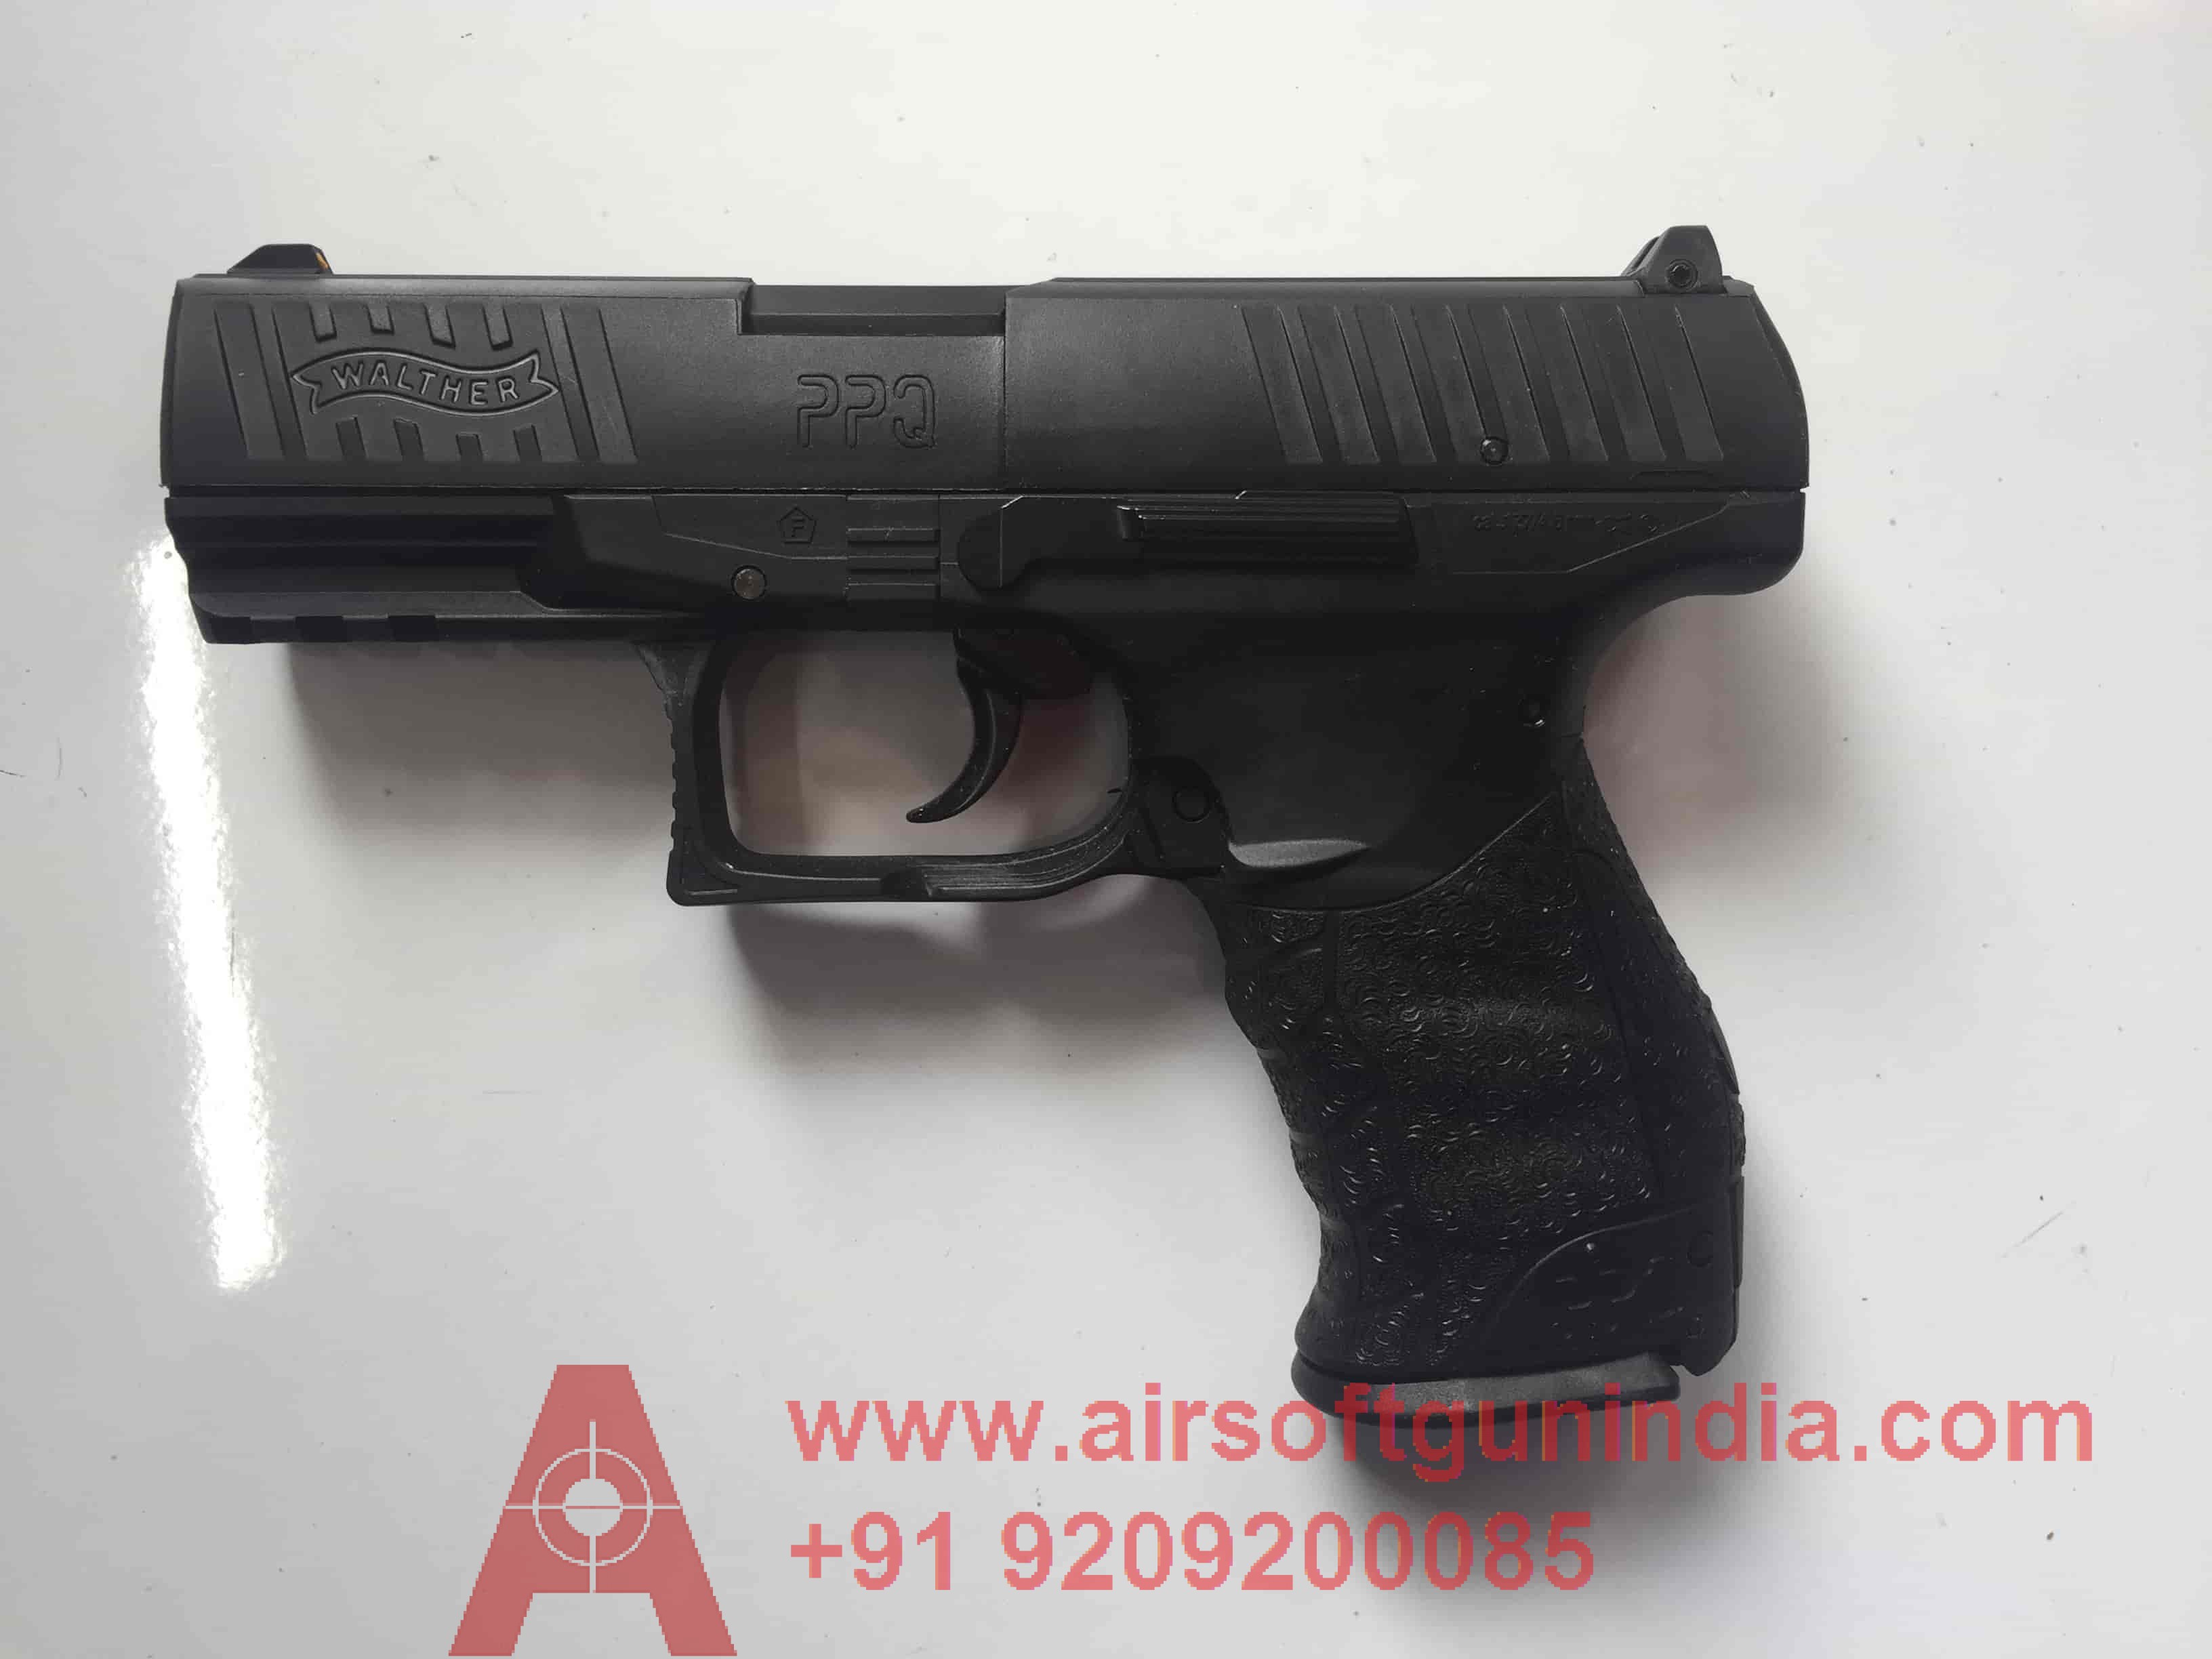 Walther PPQ / P99 Q CO2 AIR PISTOL IN INDIA By Airsoft Gun India